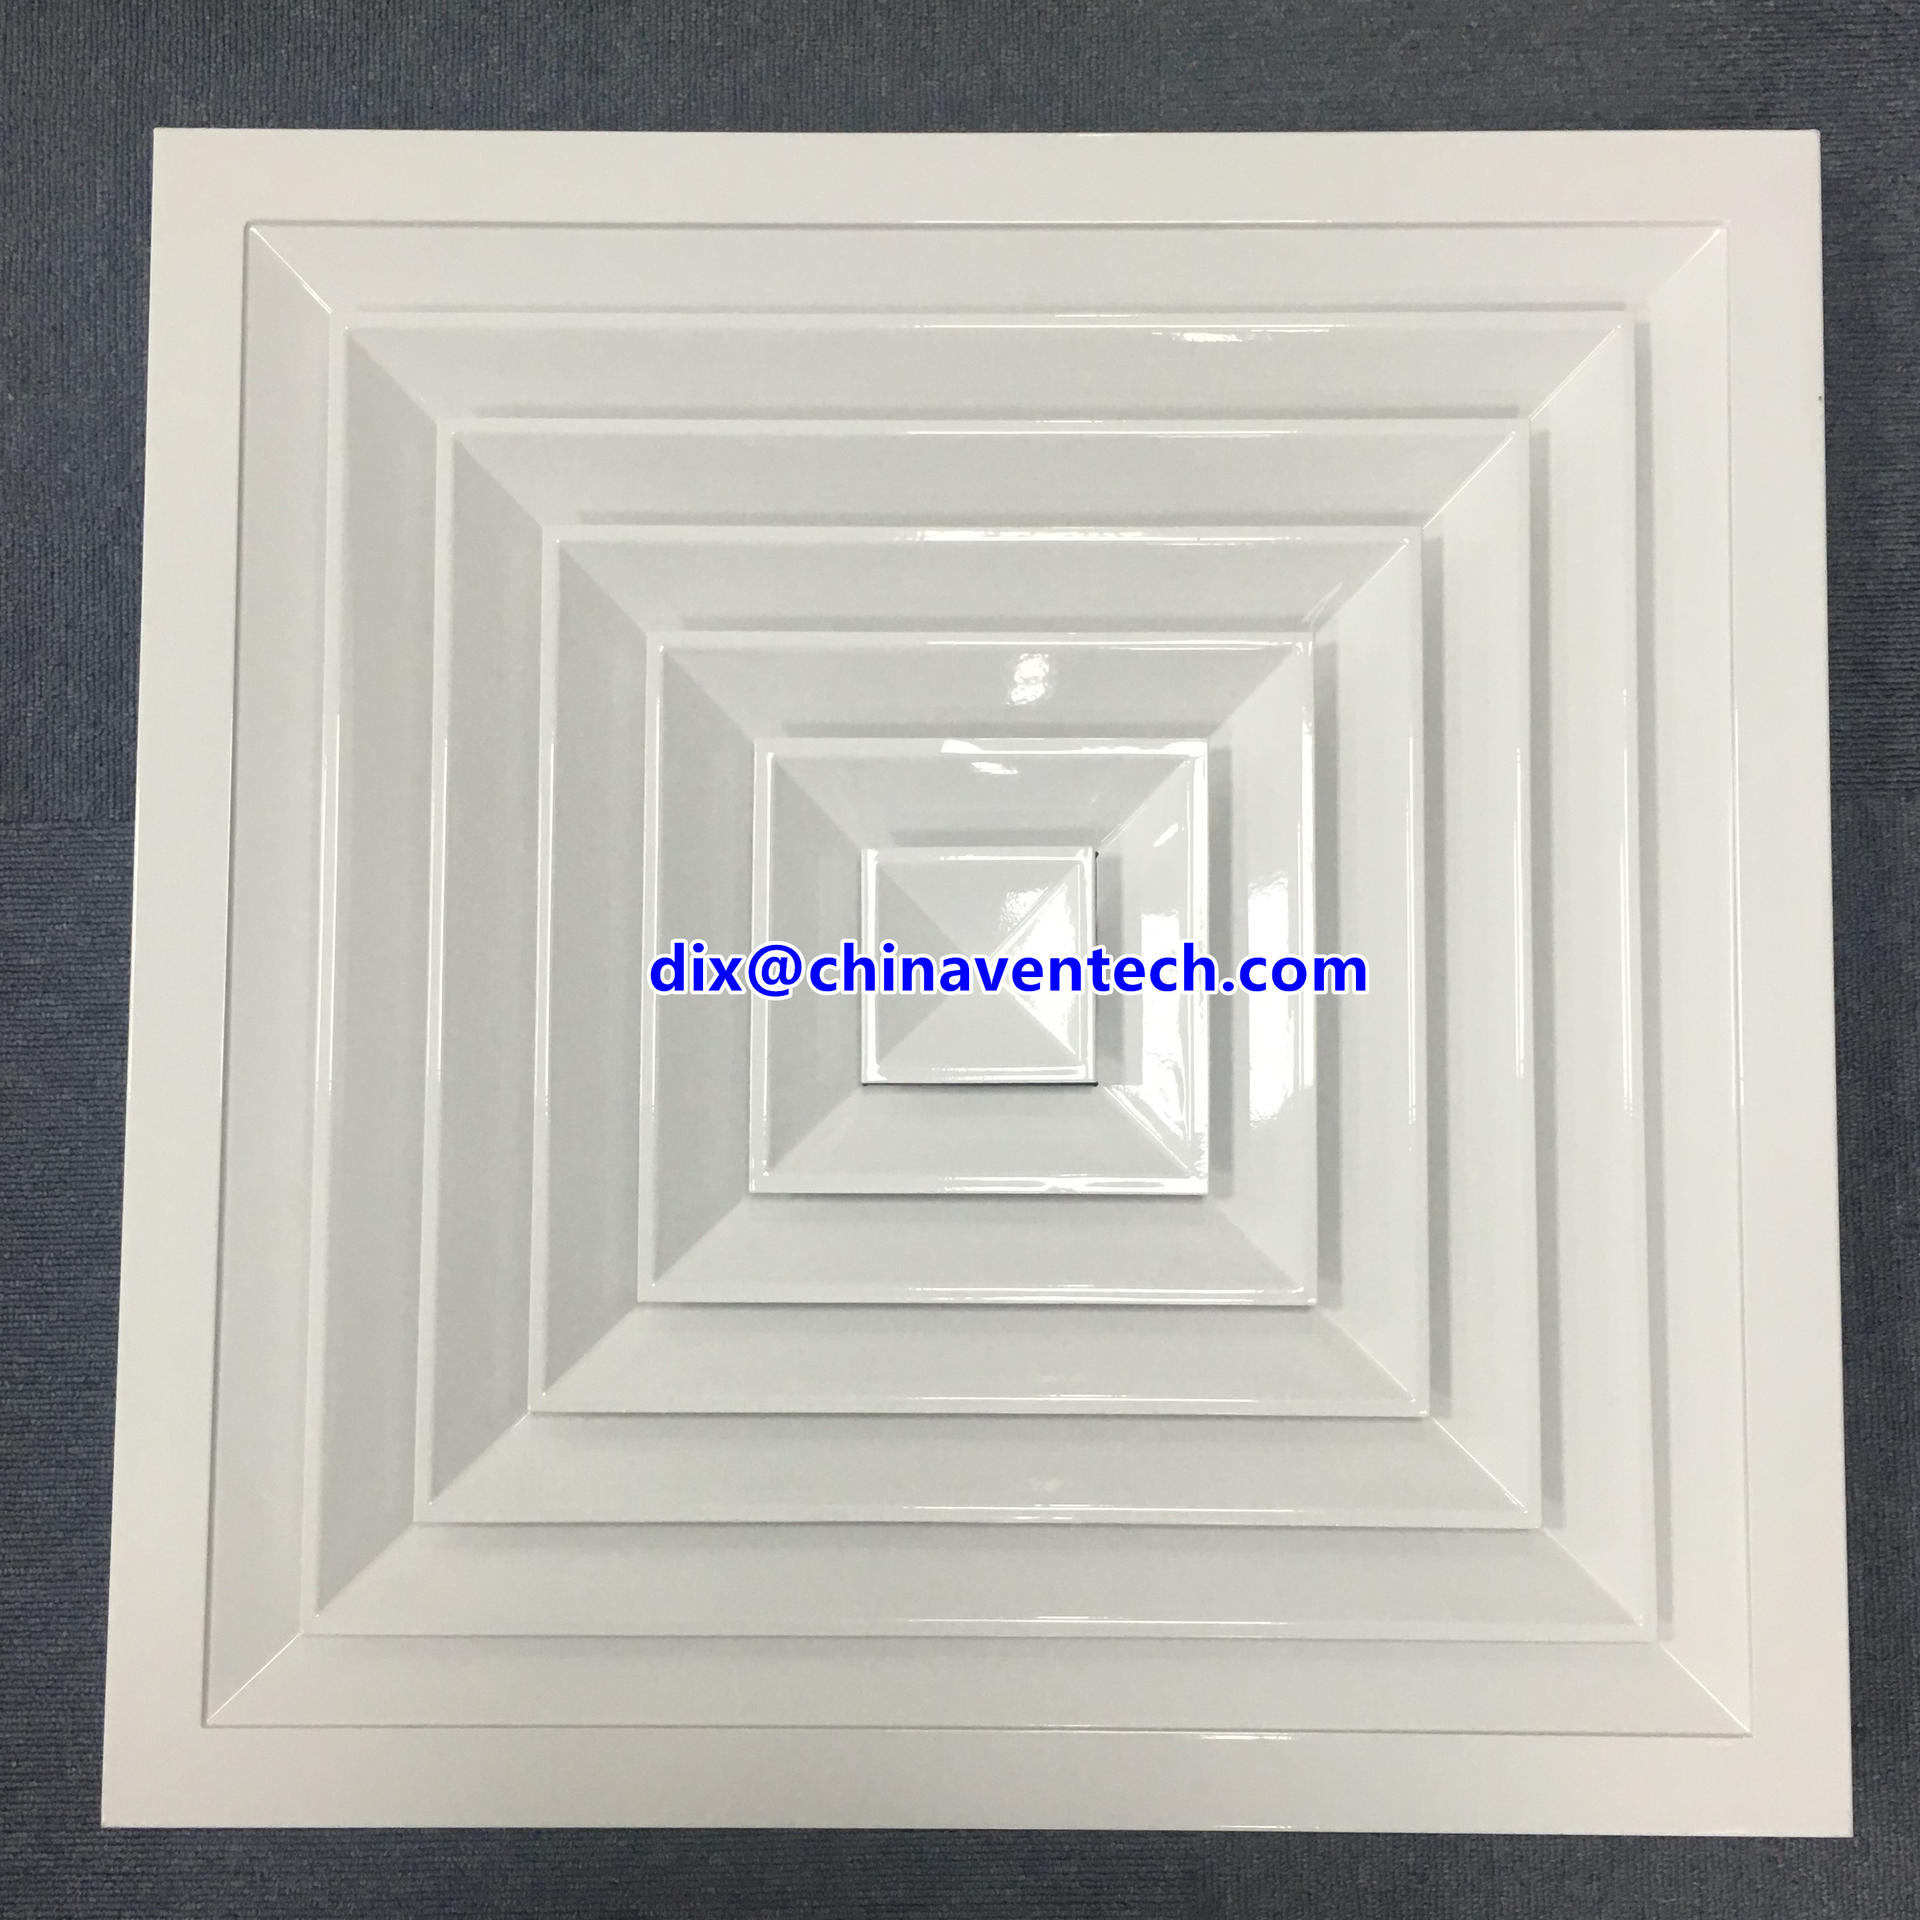 HVAC Ventilation System Parts Ceiling Mounted Square Plaque 4 Way Air Flow Directional Comfort Air Diffuser